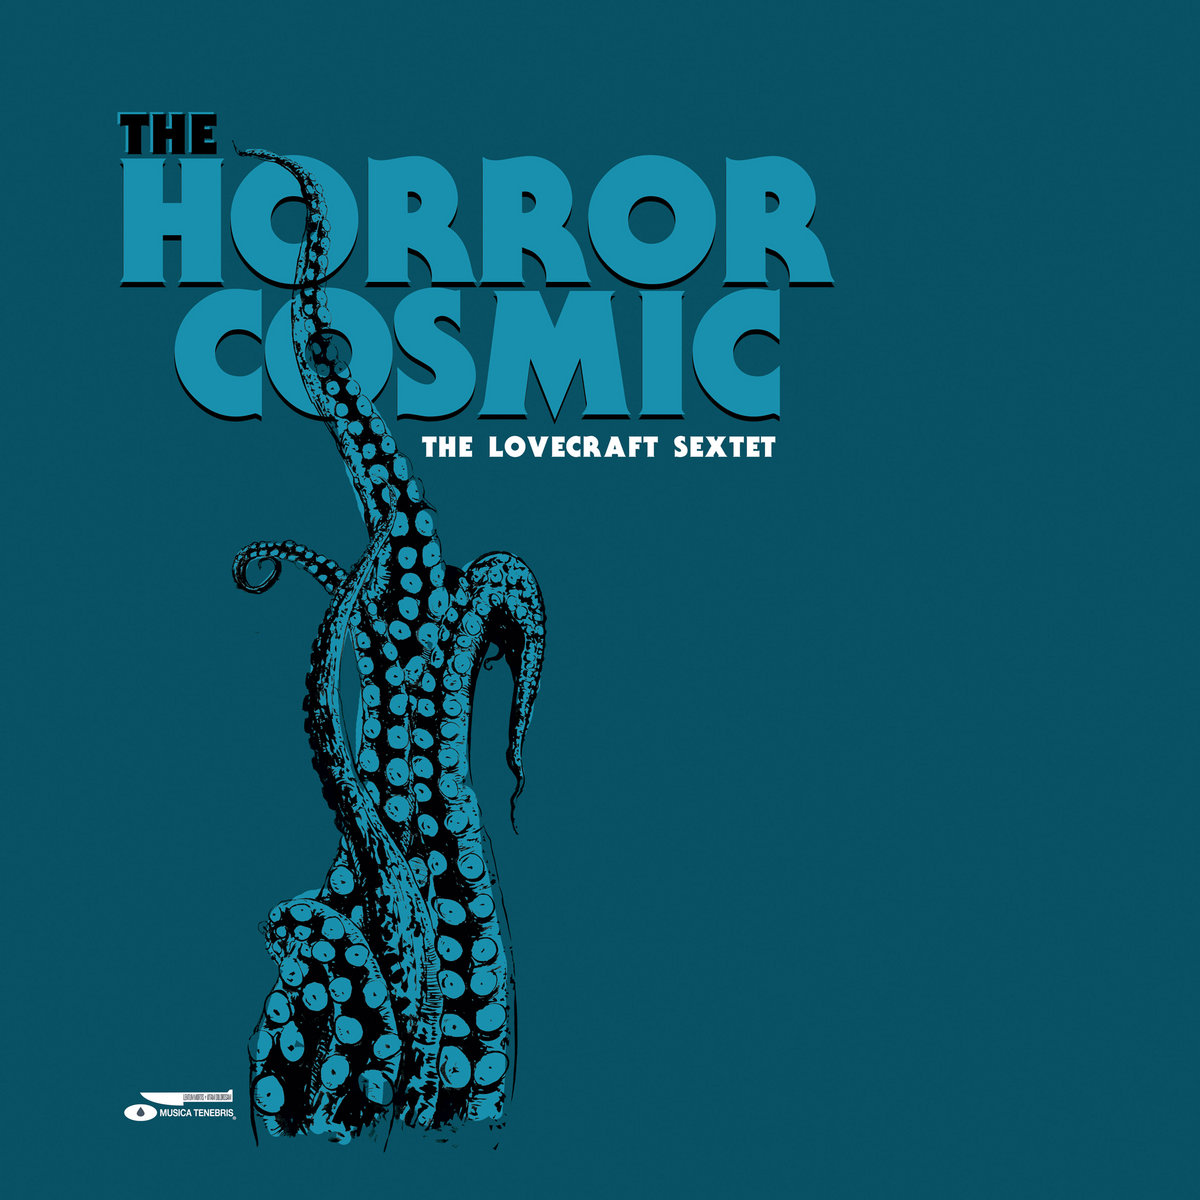 The Lovecraft Sextet cover